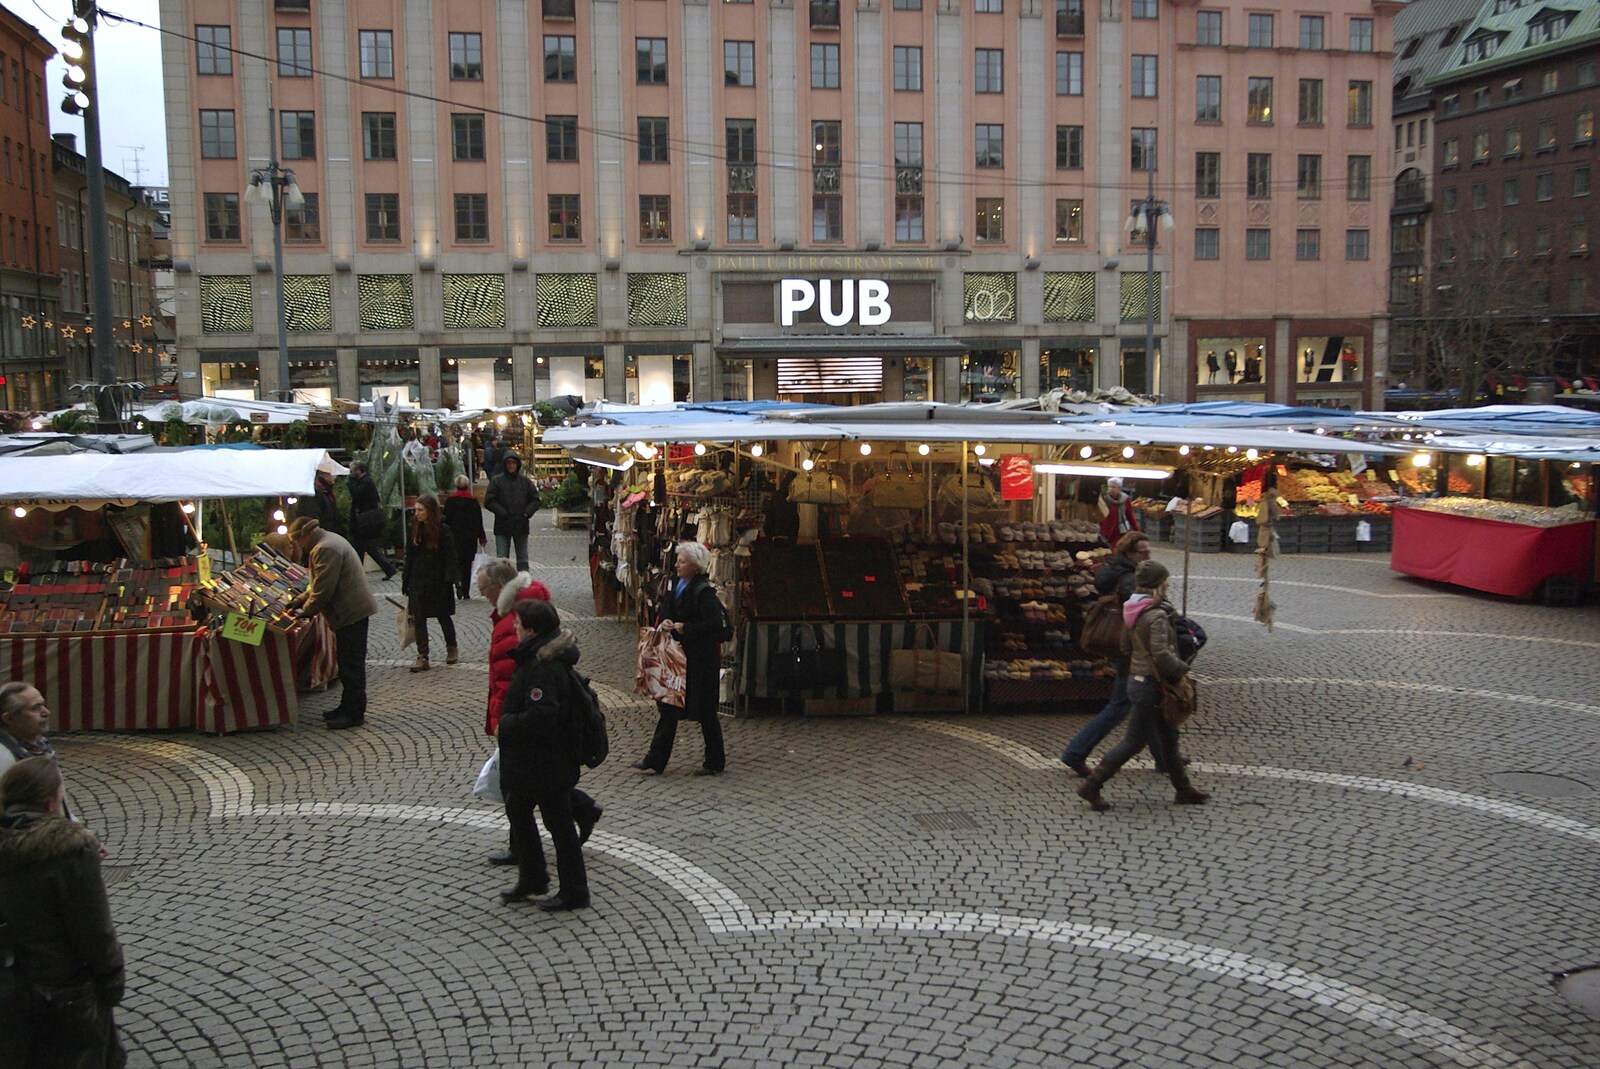 A Christmas market, and Pub from Gamla Stan, Stockholm, Sweden - 15th December 2007